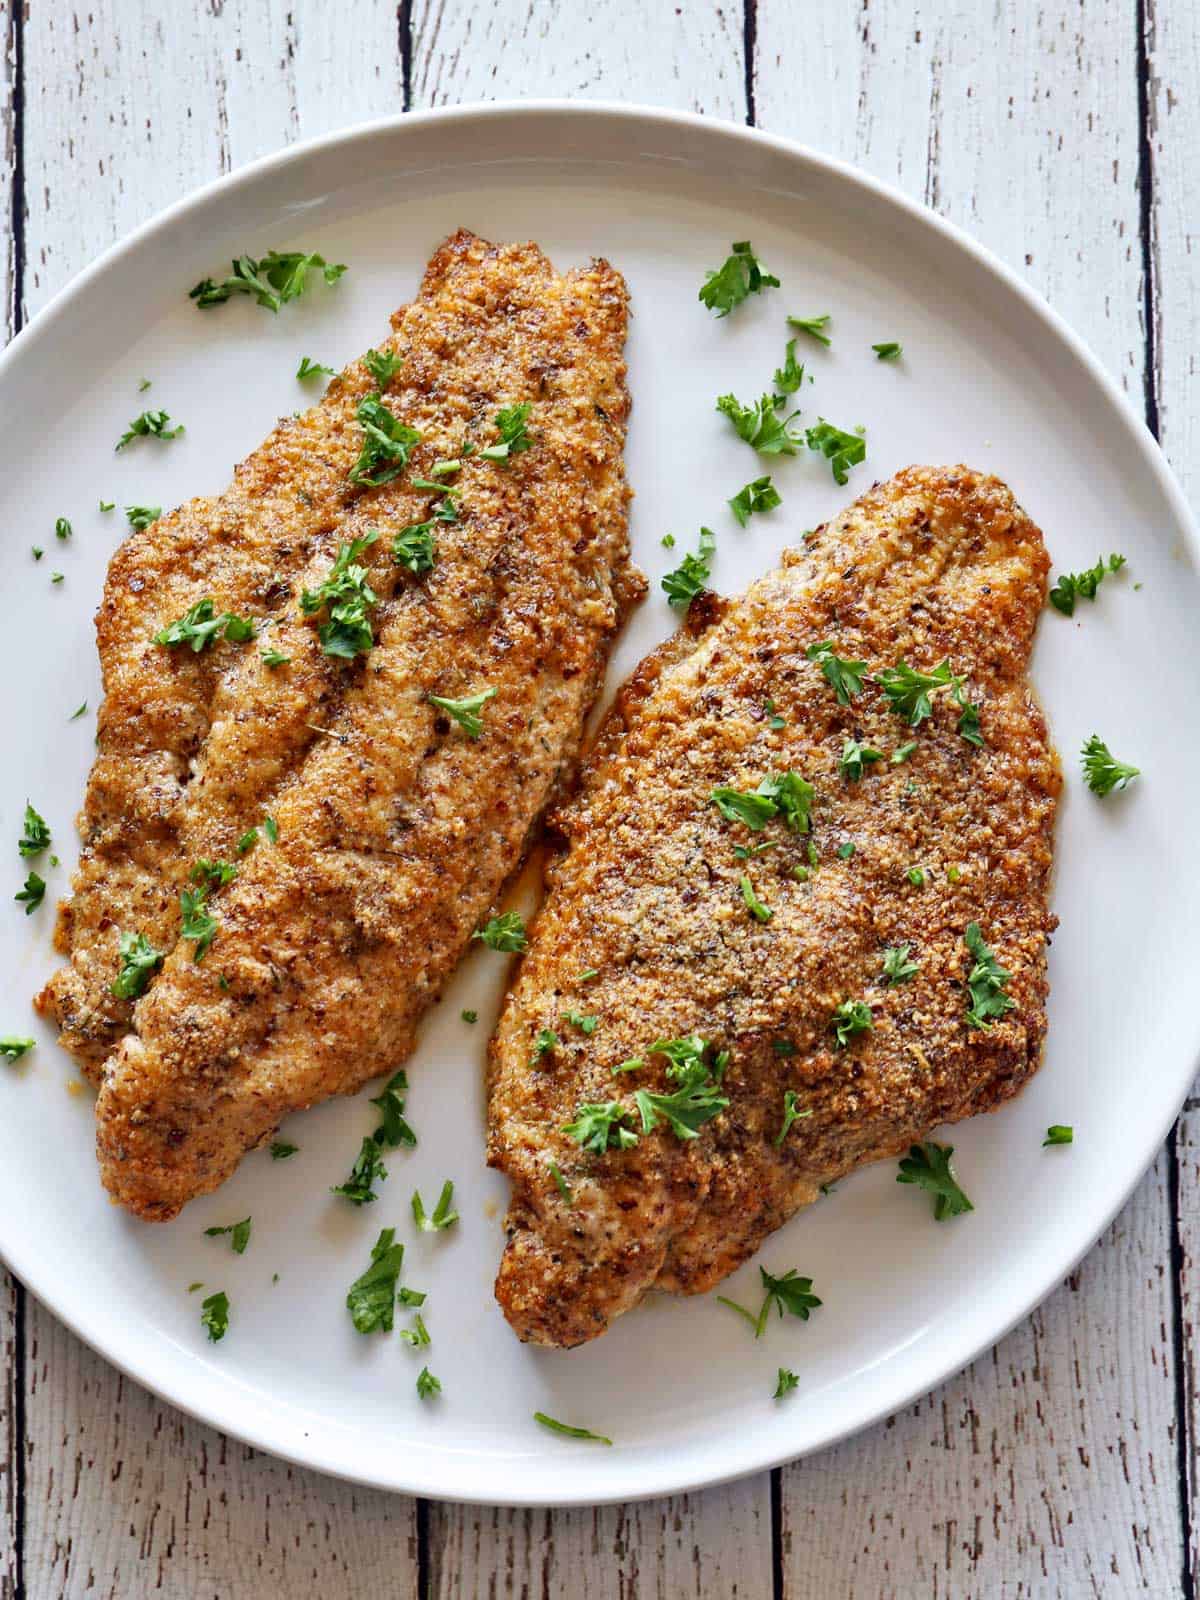 Two baked catfish fillets are served on a white plate.